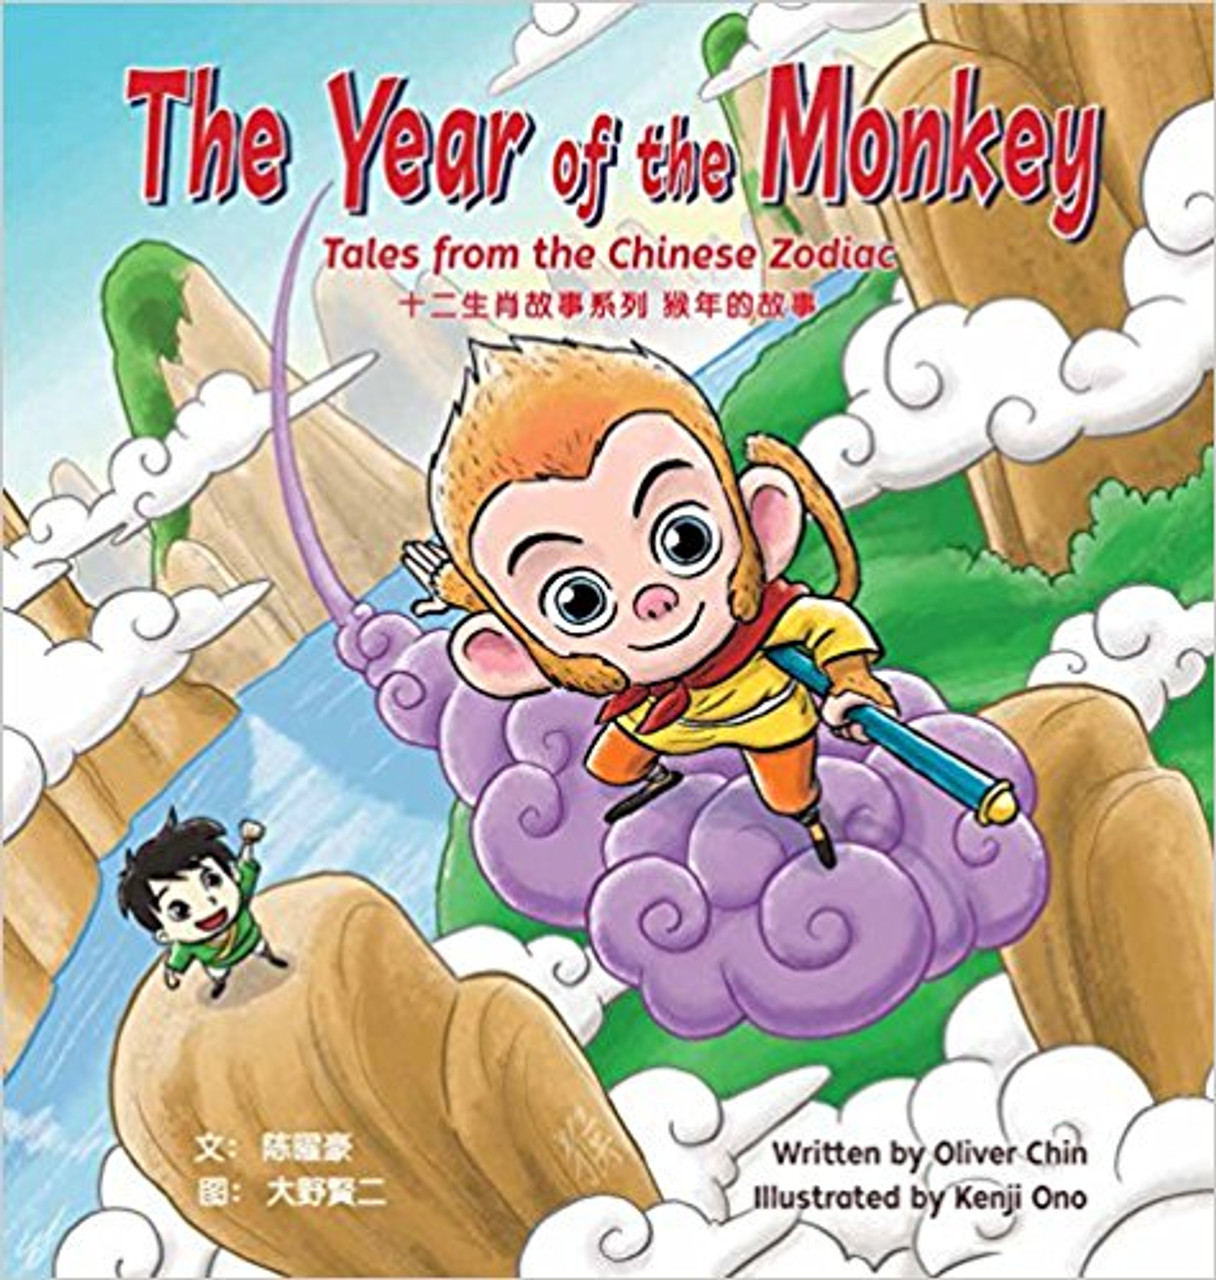 The Year of the Monkey by Oliver Clyde Chin